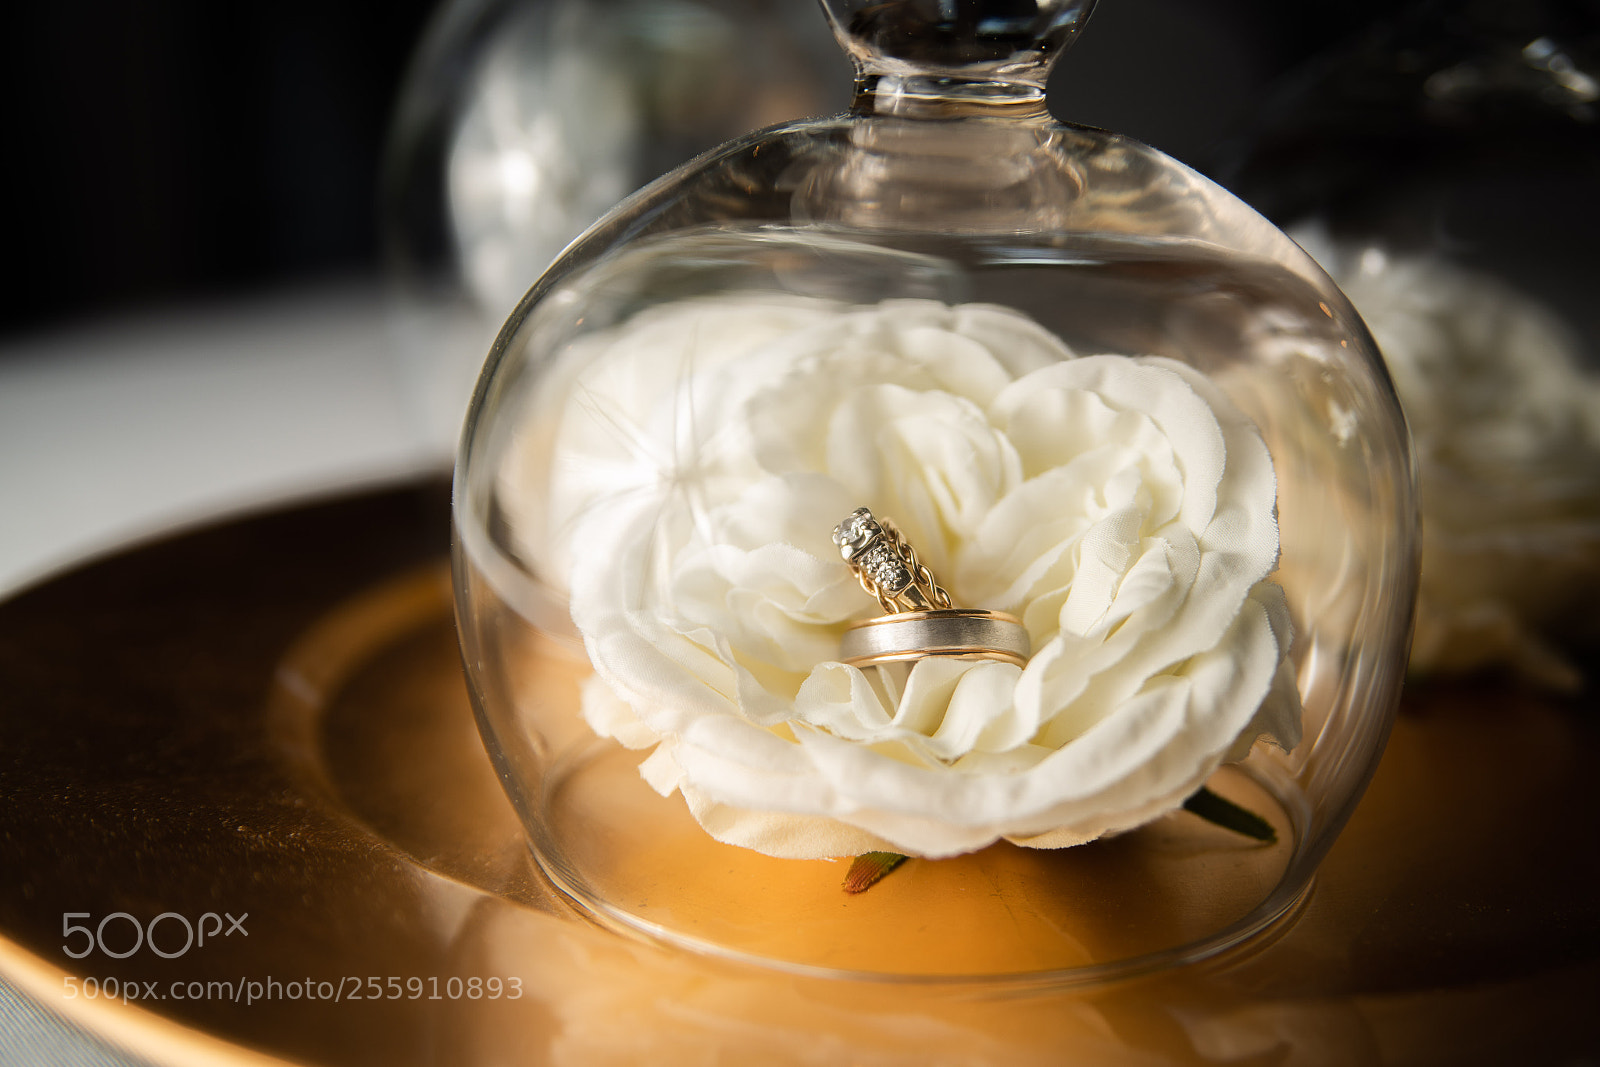 Sony a99 II sample photo. Rings in glass photography